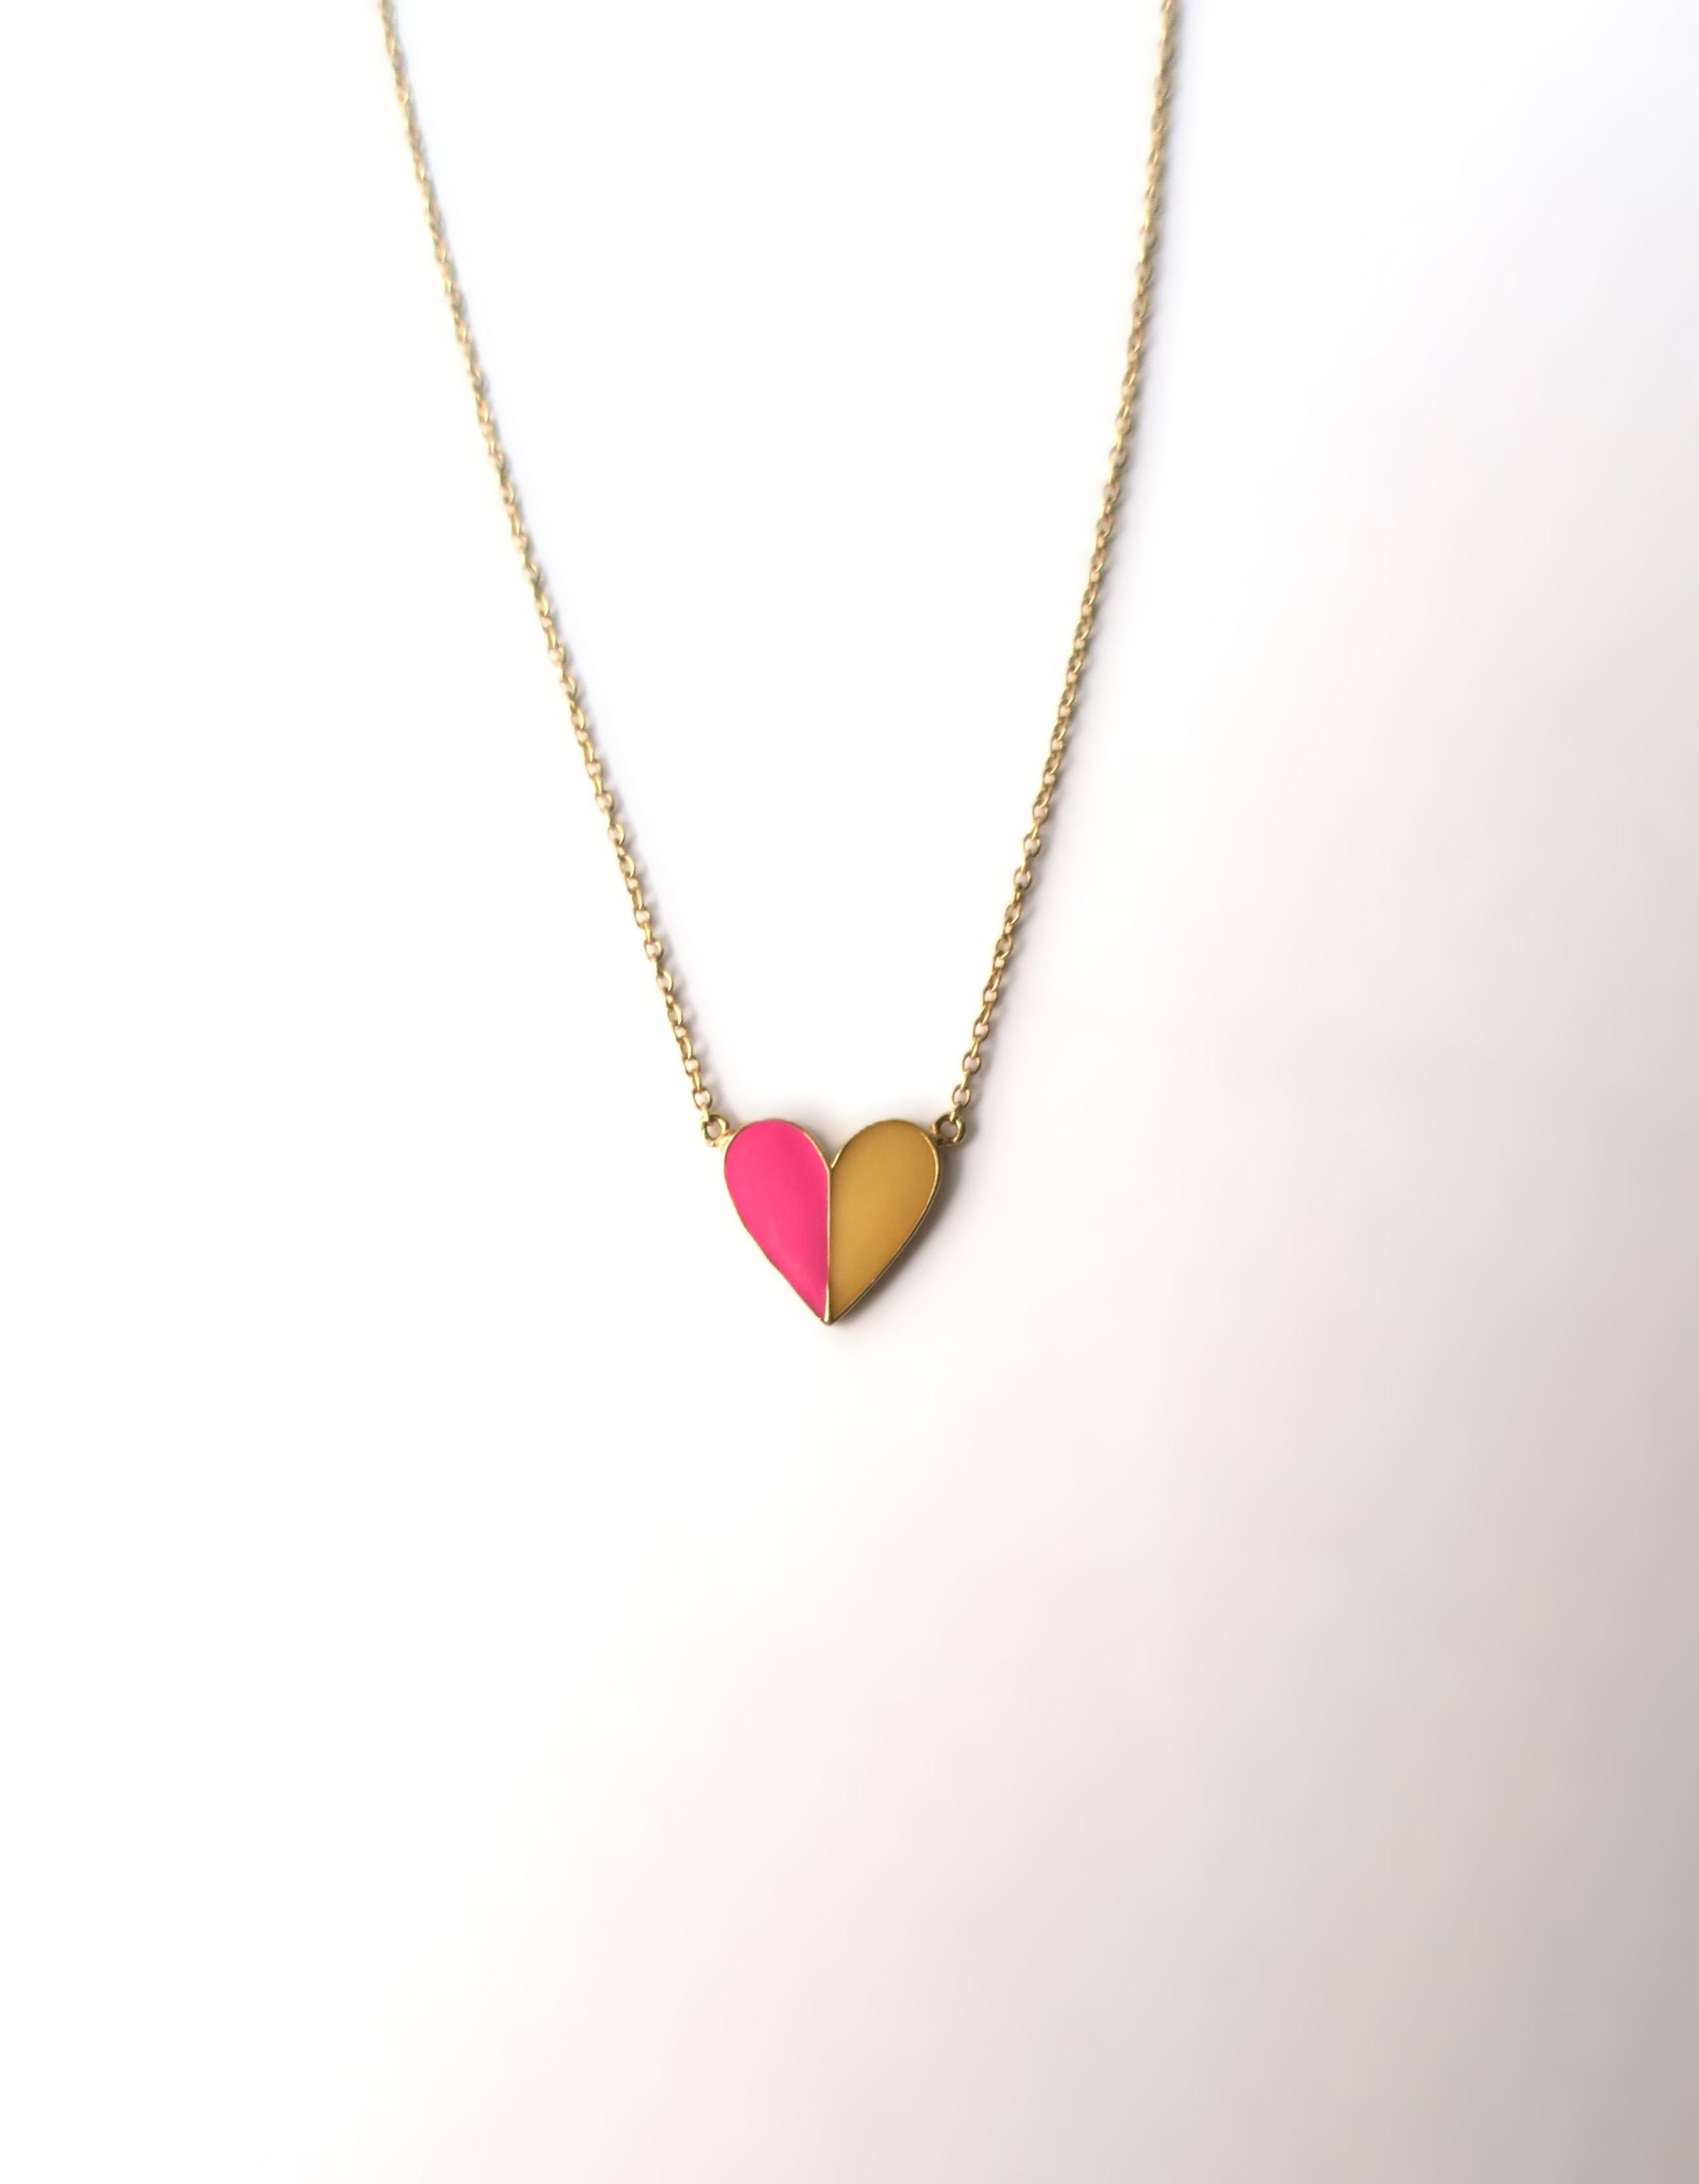 A beautiful Italian 14-karat gold and enamel (bright pink and yellow) heart necklace. Colors are reminiscent of the Italian summer spirit beach coast. Beautiful as a standalone necklace or stack with other necklaces. Necklace has two-length options